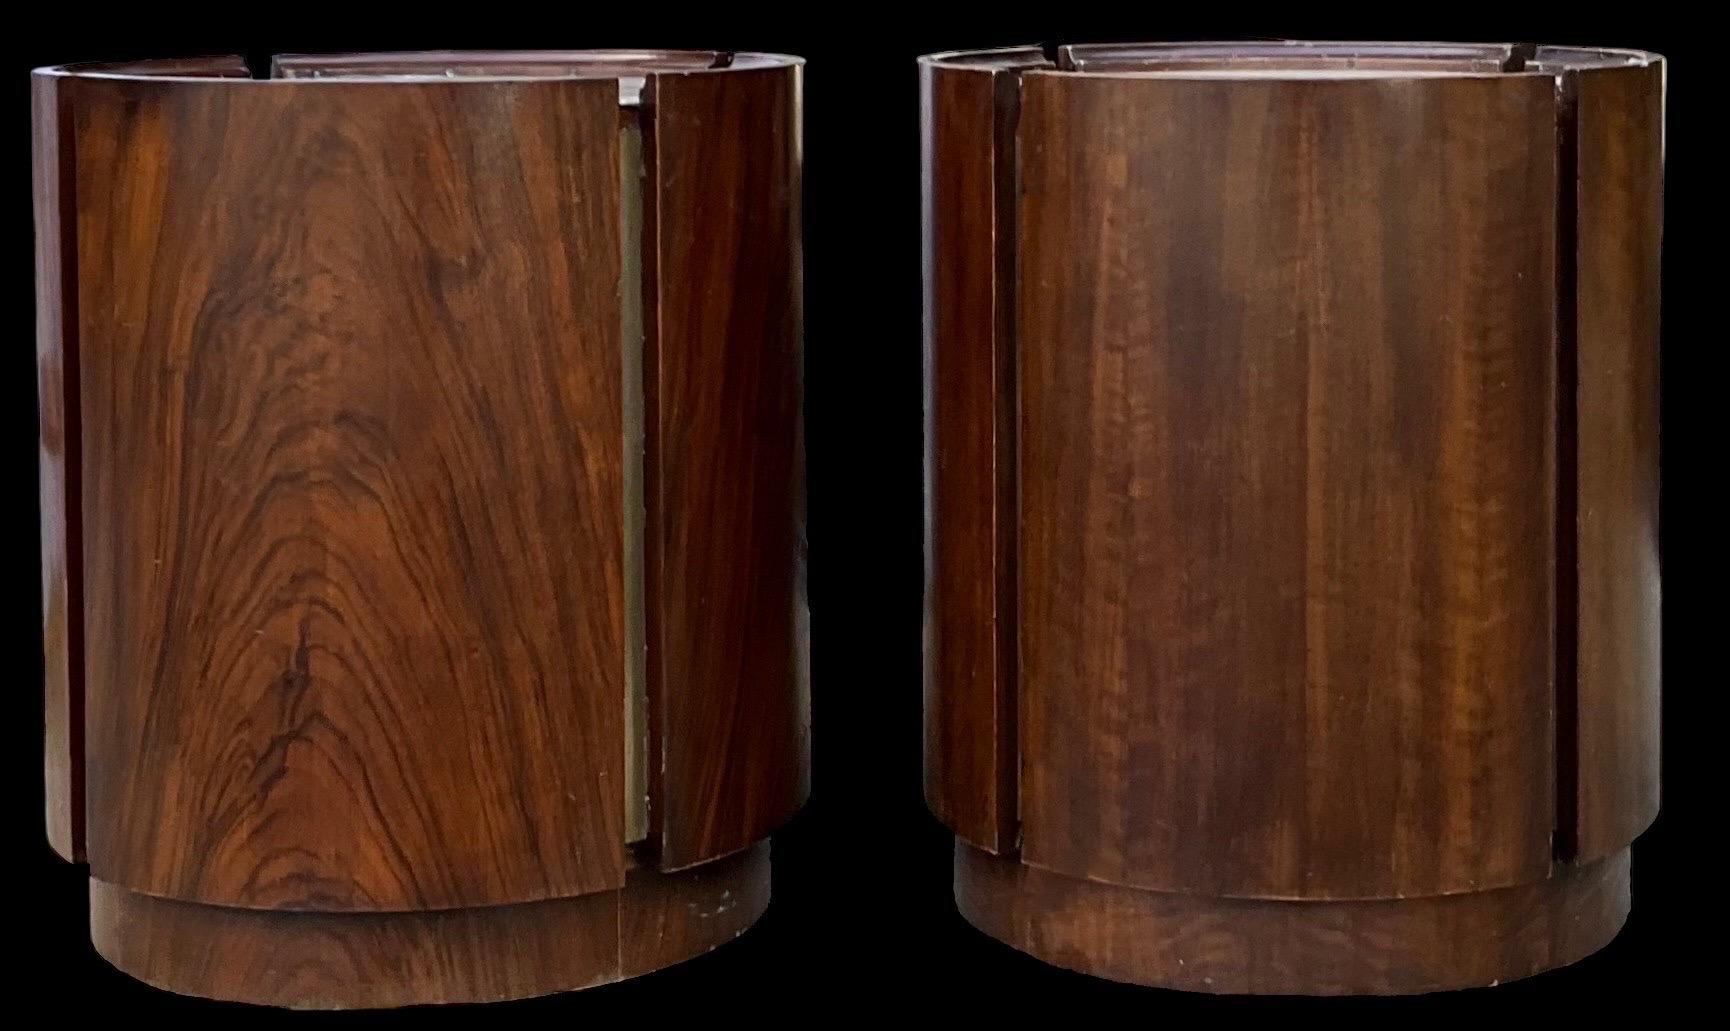 American Mid-Century Modern Walnut And Brass Cylinder Form Drum Tables -Pair For Sale